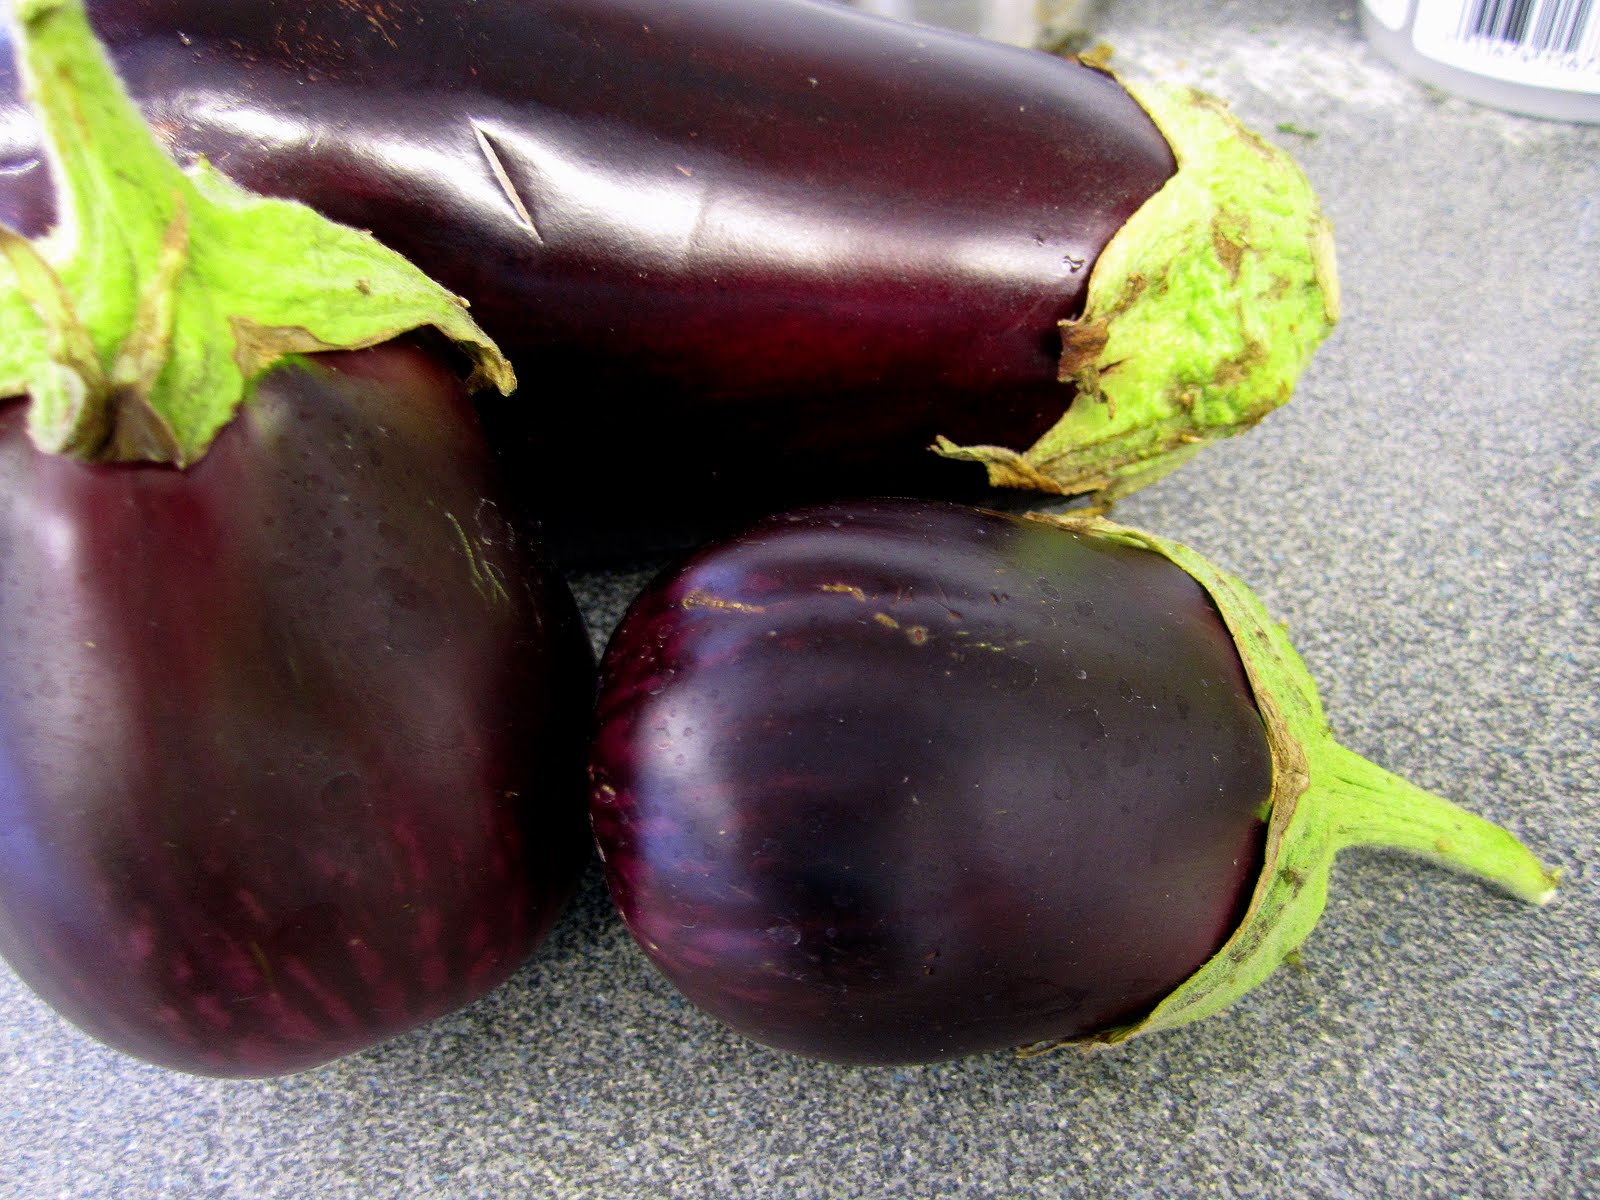 The Fitness Gourmet: Small eggplant. Big meal.